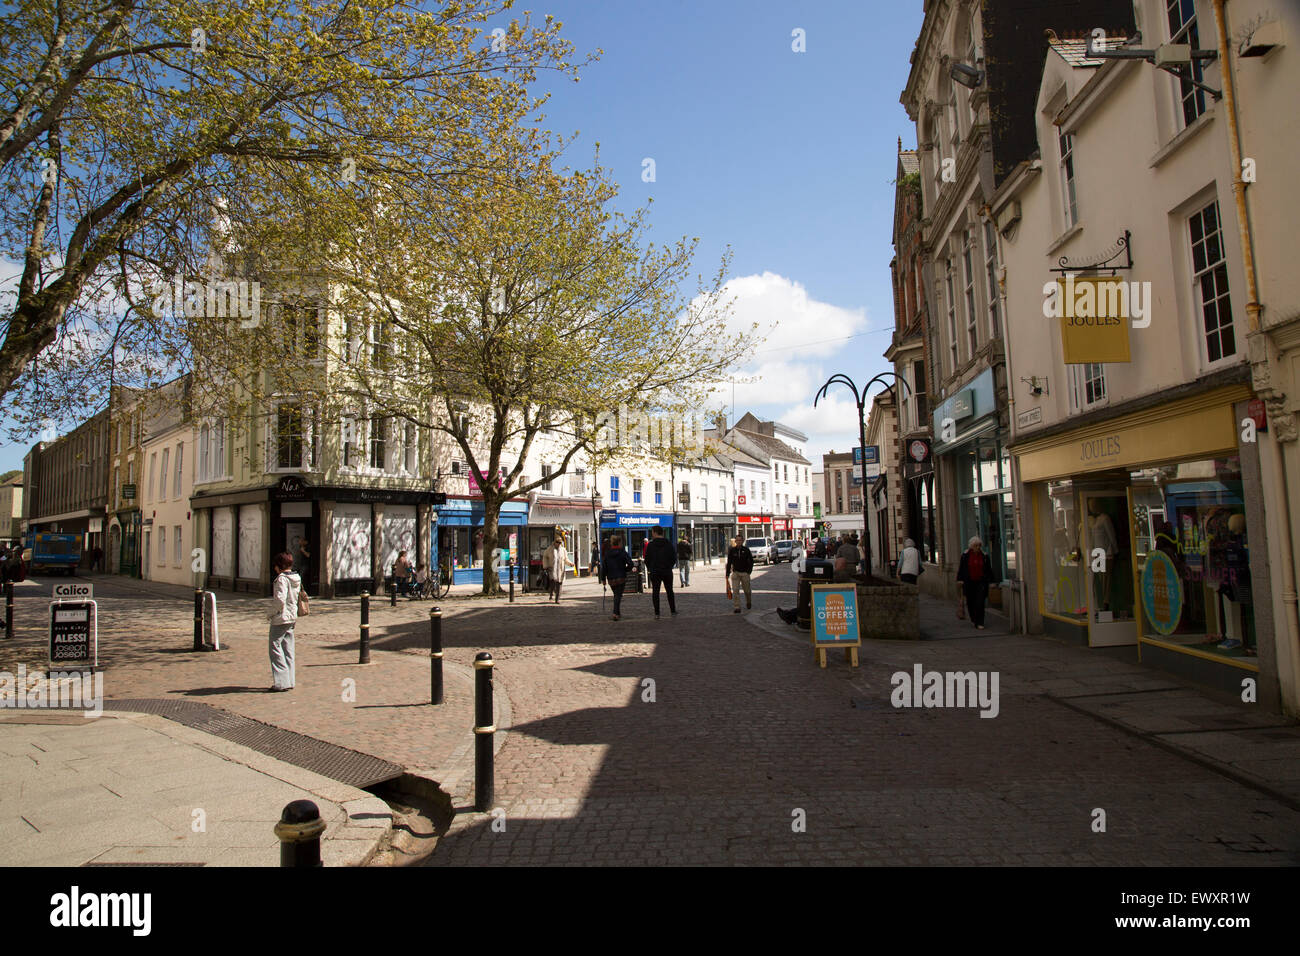 People shopping in the town centre, Truro, Cornwall, England, UK Stock Photo